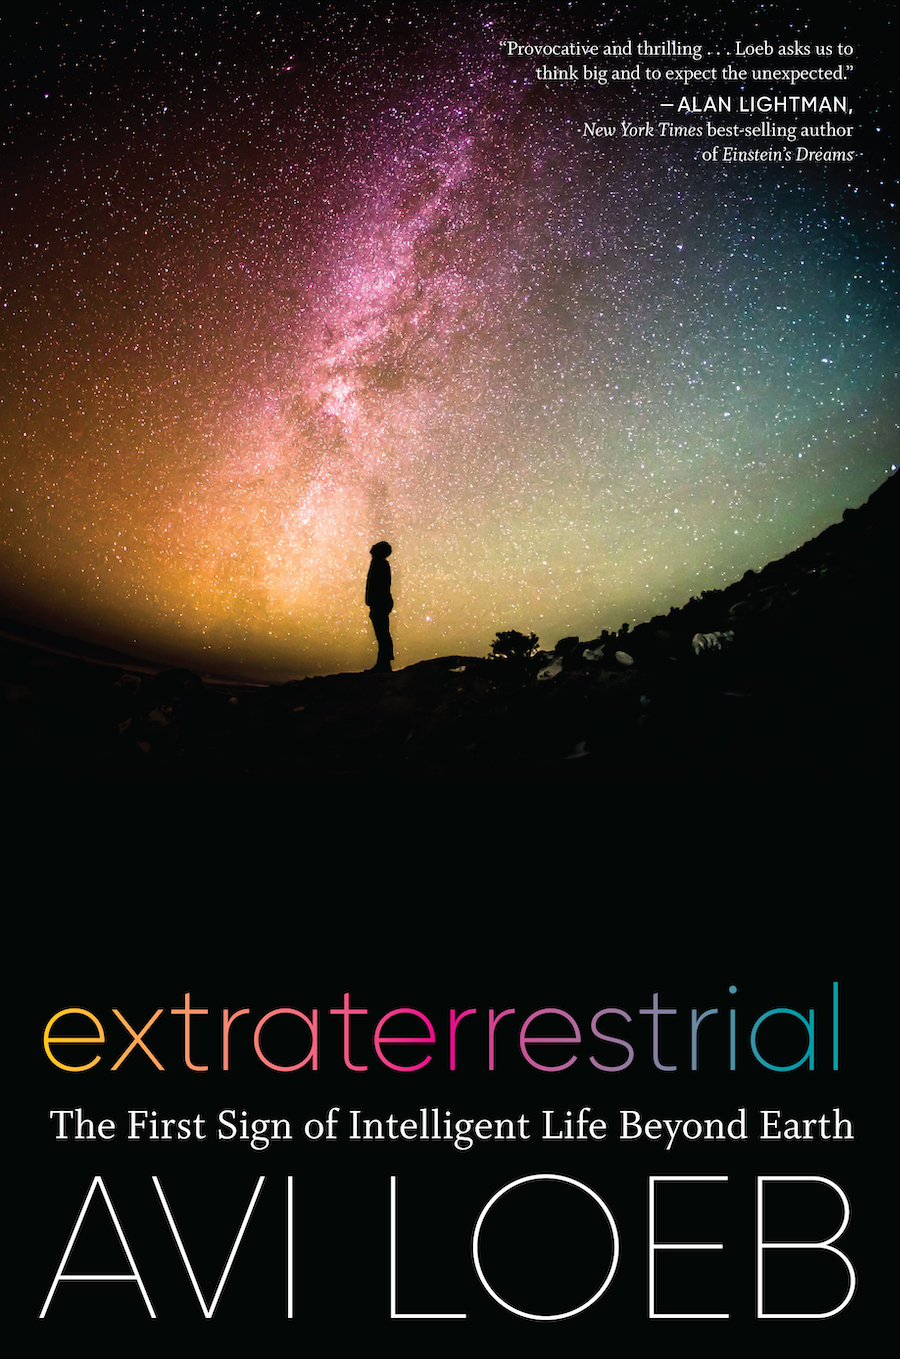 Extraterrestrial book cover